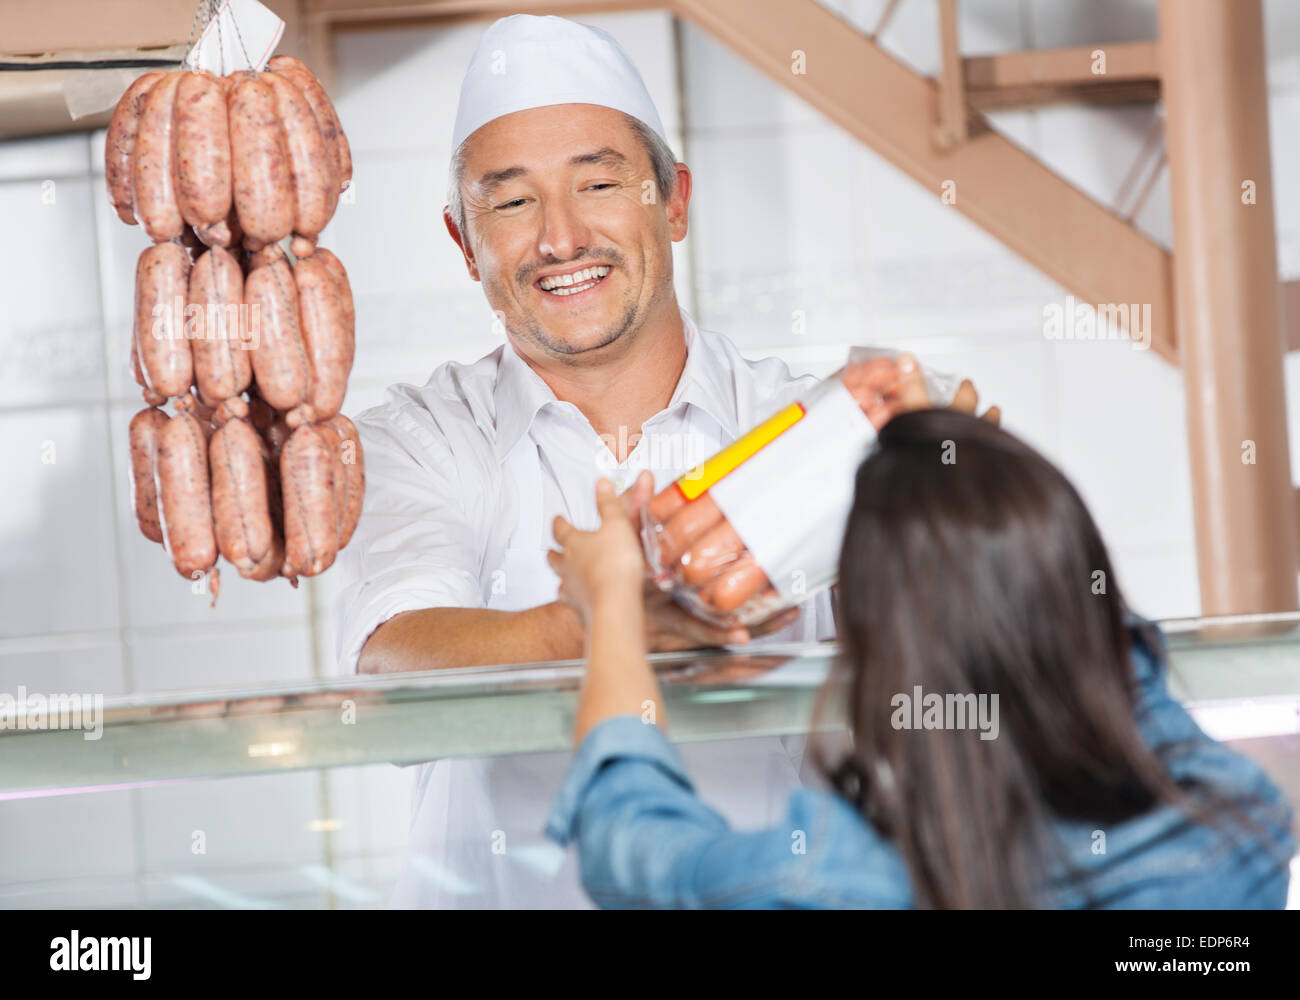 Butcher Giving Packed Sausages To Female Customer Stock Photo